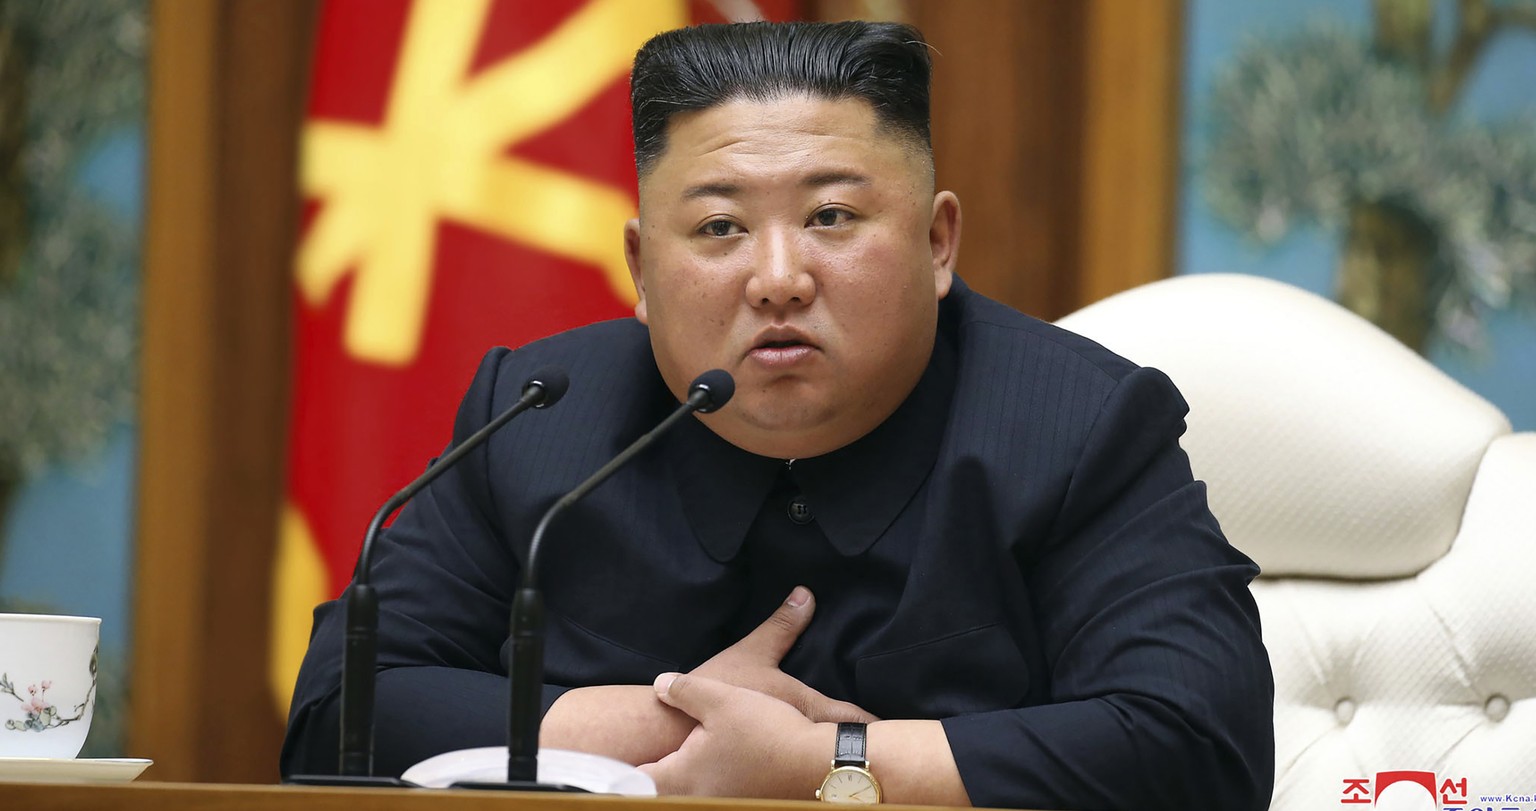 FILE - In this Saturday, April 11, 2020, file photo provided by the North Korean government, North Korean leader Kim Jong Un attends a politburo meeting of the ruling Workers&#039; Party of Korea in P ...